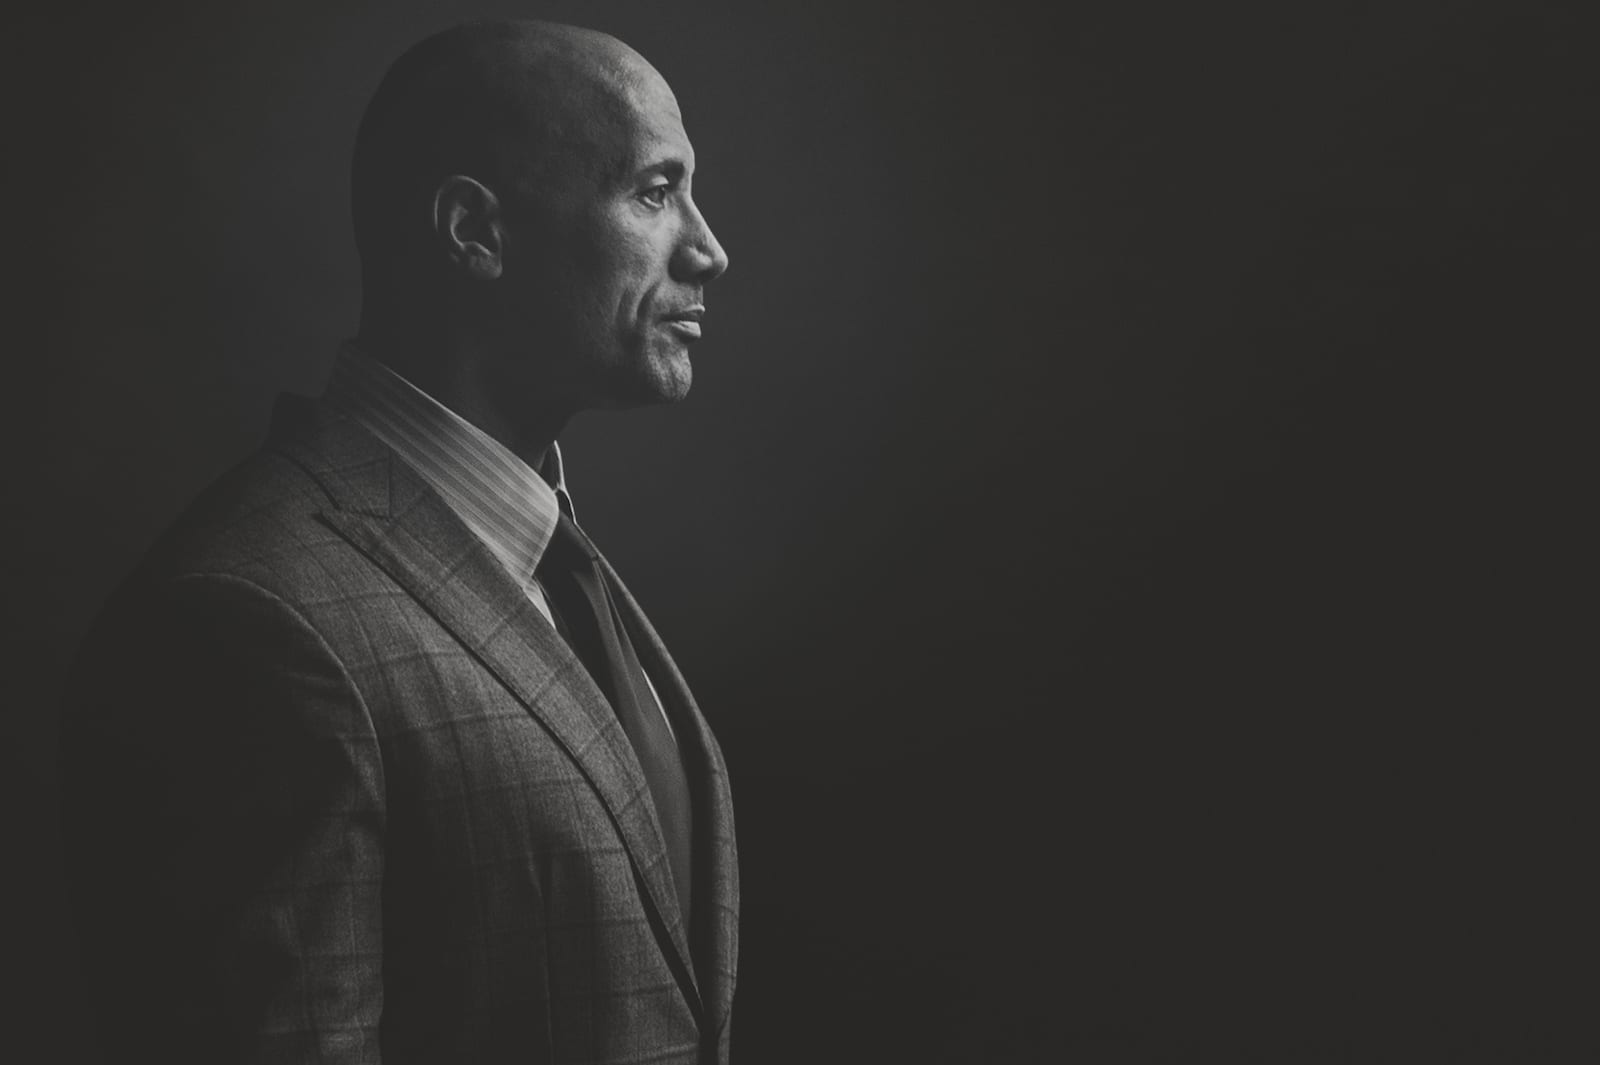 Black and white side profile of Dwayne "The Rock" Johnson with Fortune Magazine posing for the camera